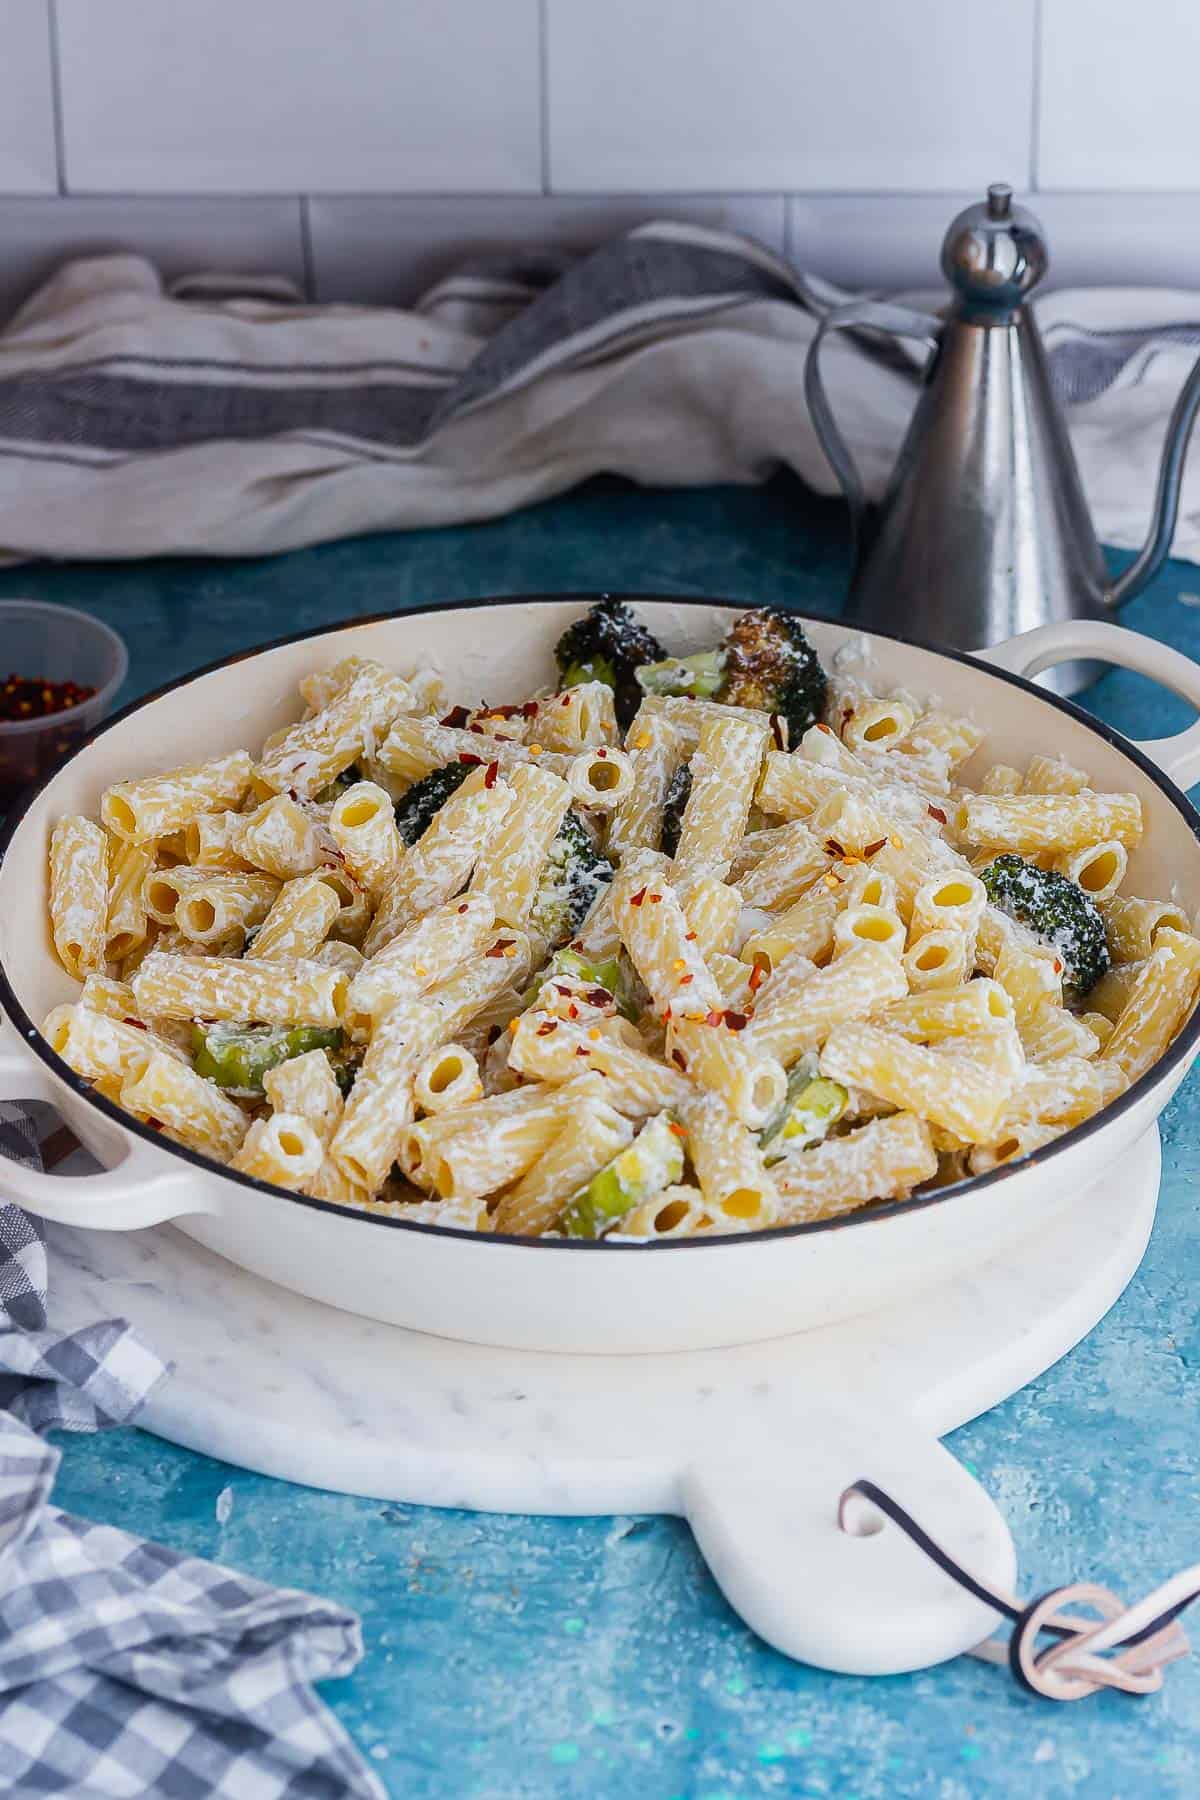 Ricotta pasta with broccoli in a pot on a blue surface